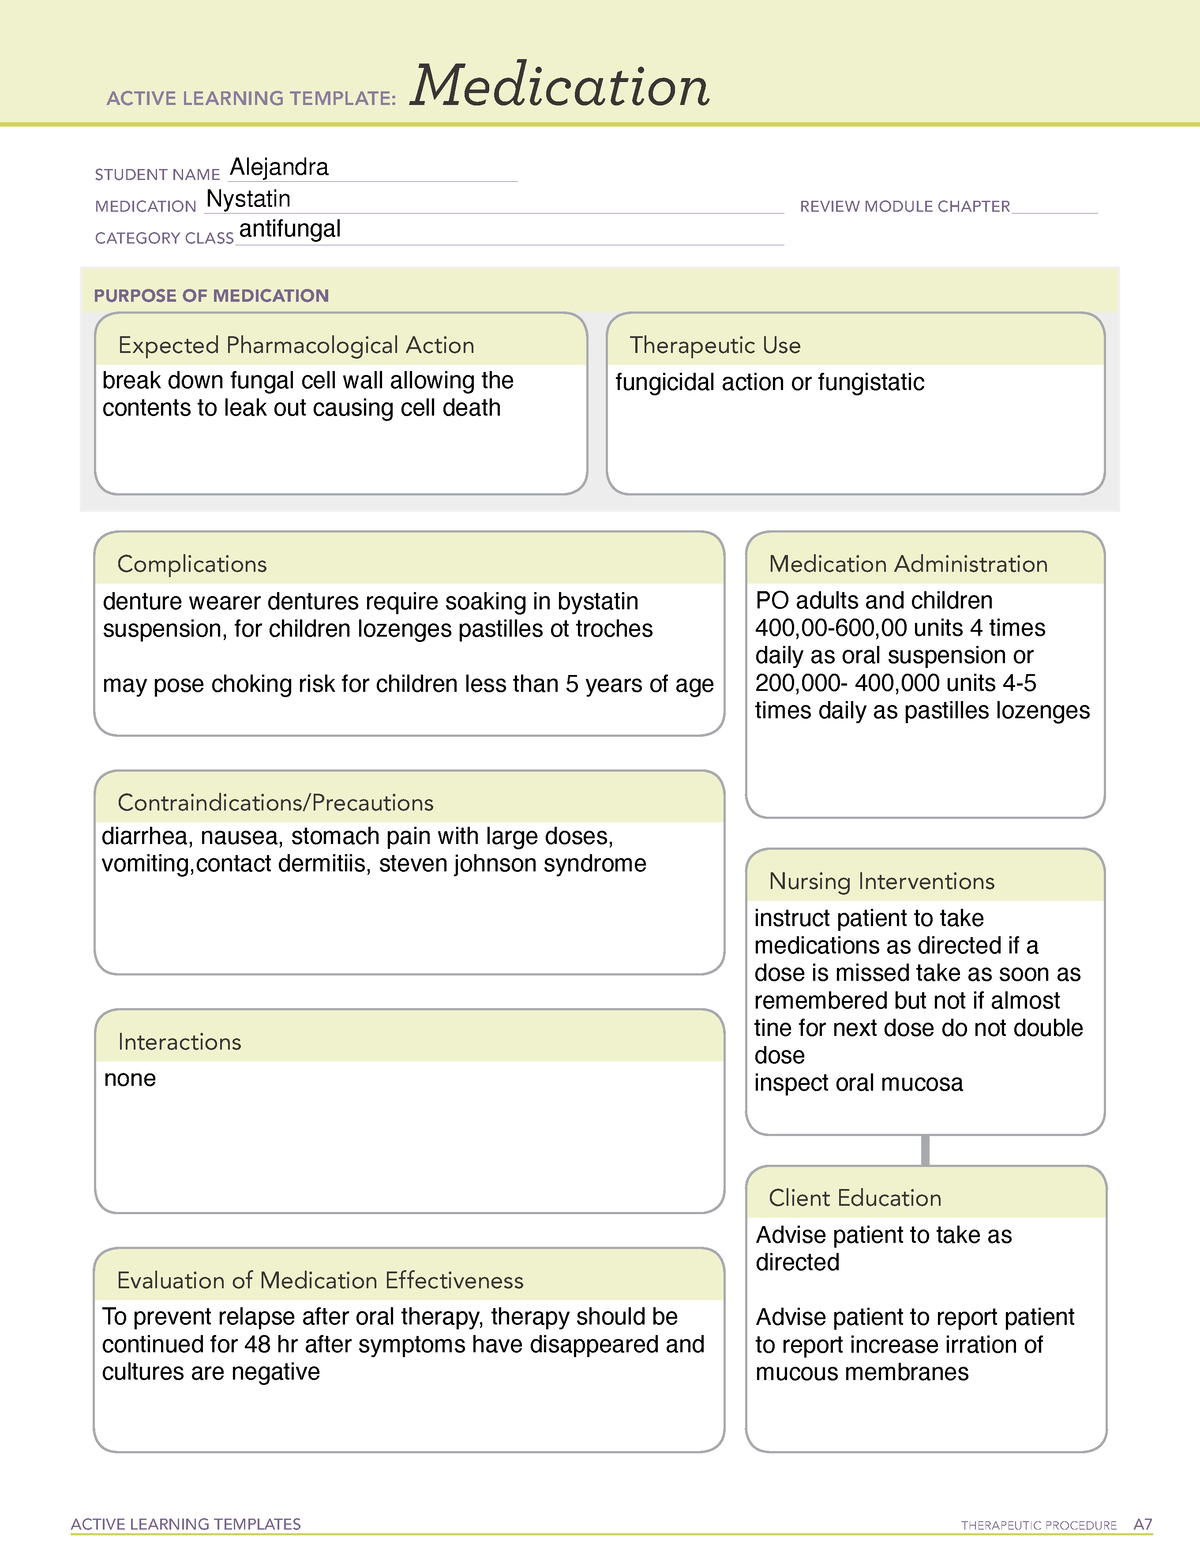 Medication Nystatin Medsheets from ATI ACTIVE LEARNING TEMPLATES